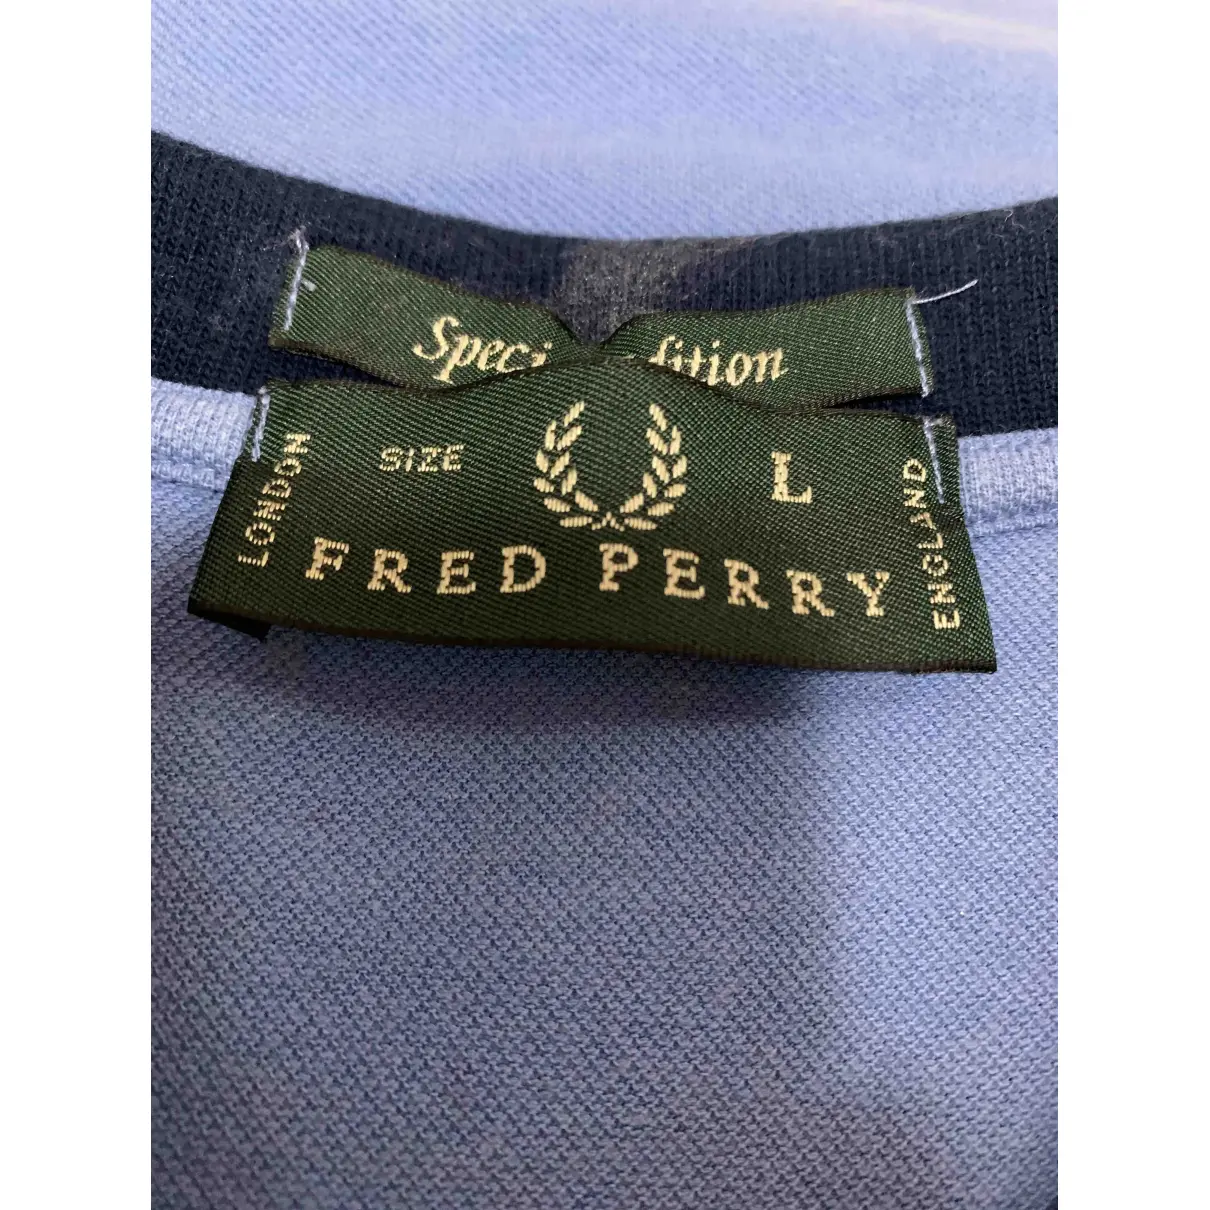 Luxury Fred Perry Polo shirts Men